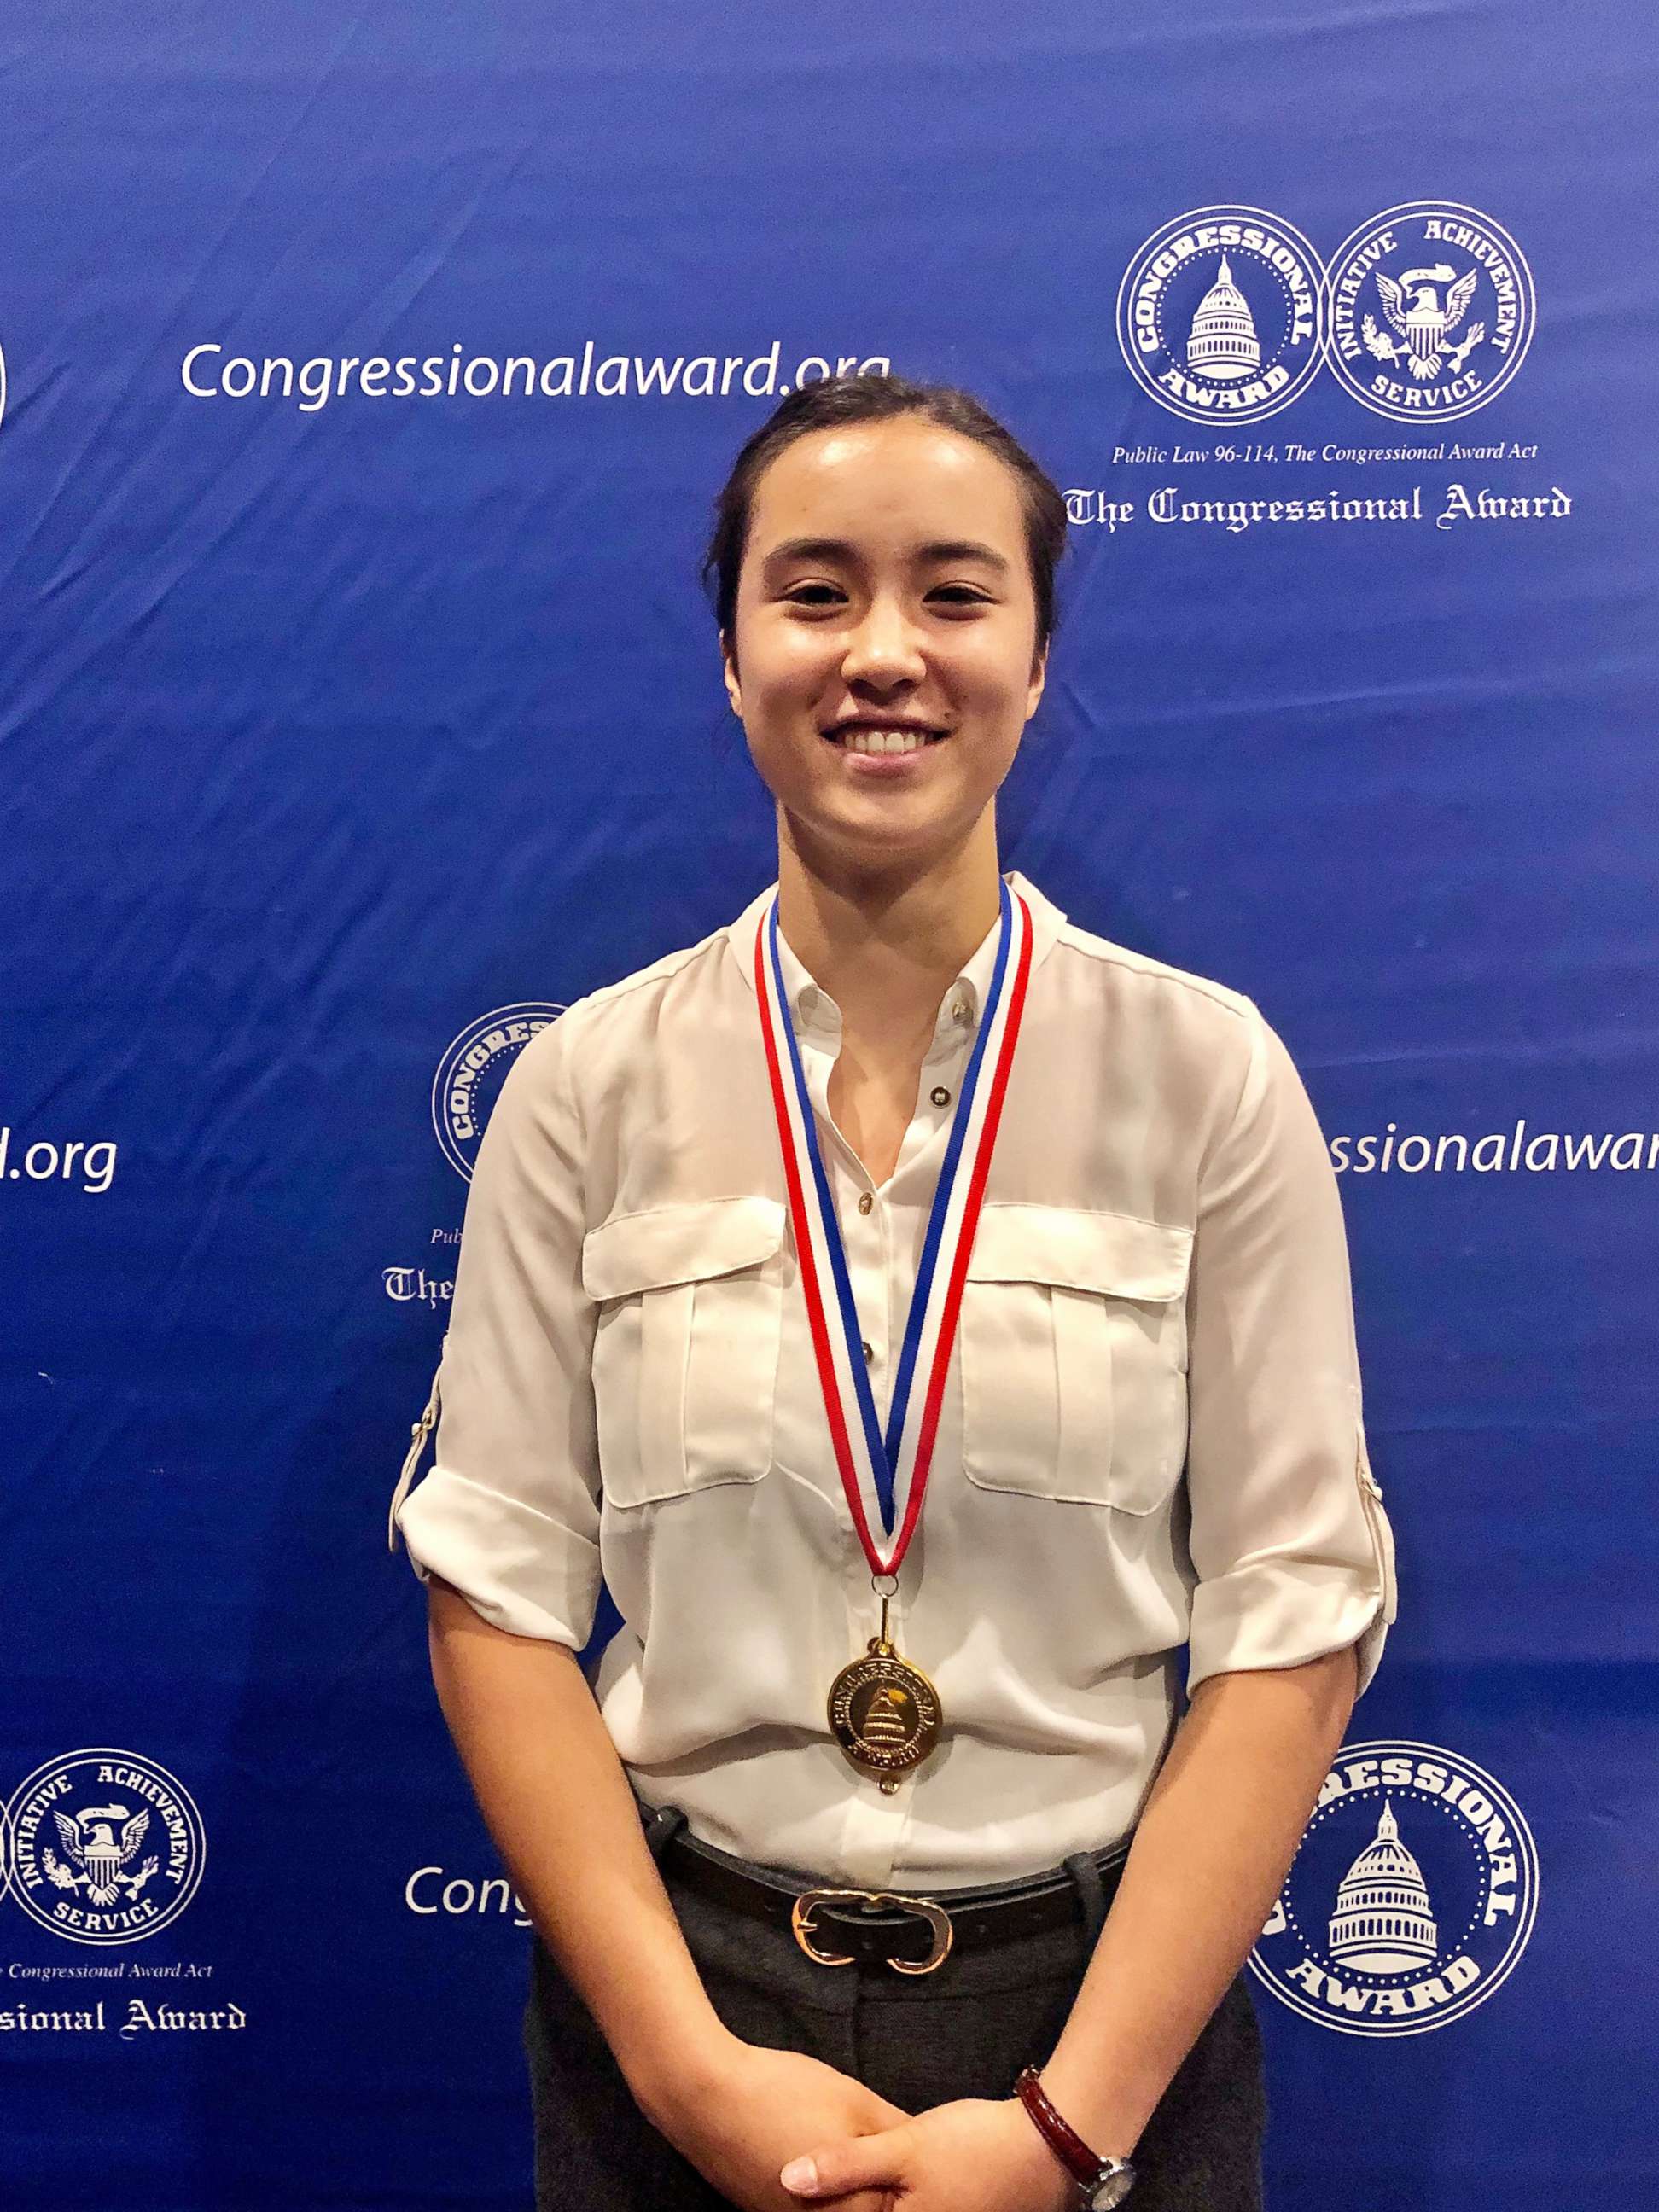 PHOTO: Alex Jin from Maryland poses for a photo after receiving her Congressional Gold Medal in Washington on June 20th, 2019.